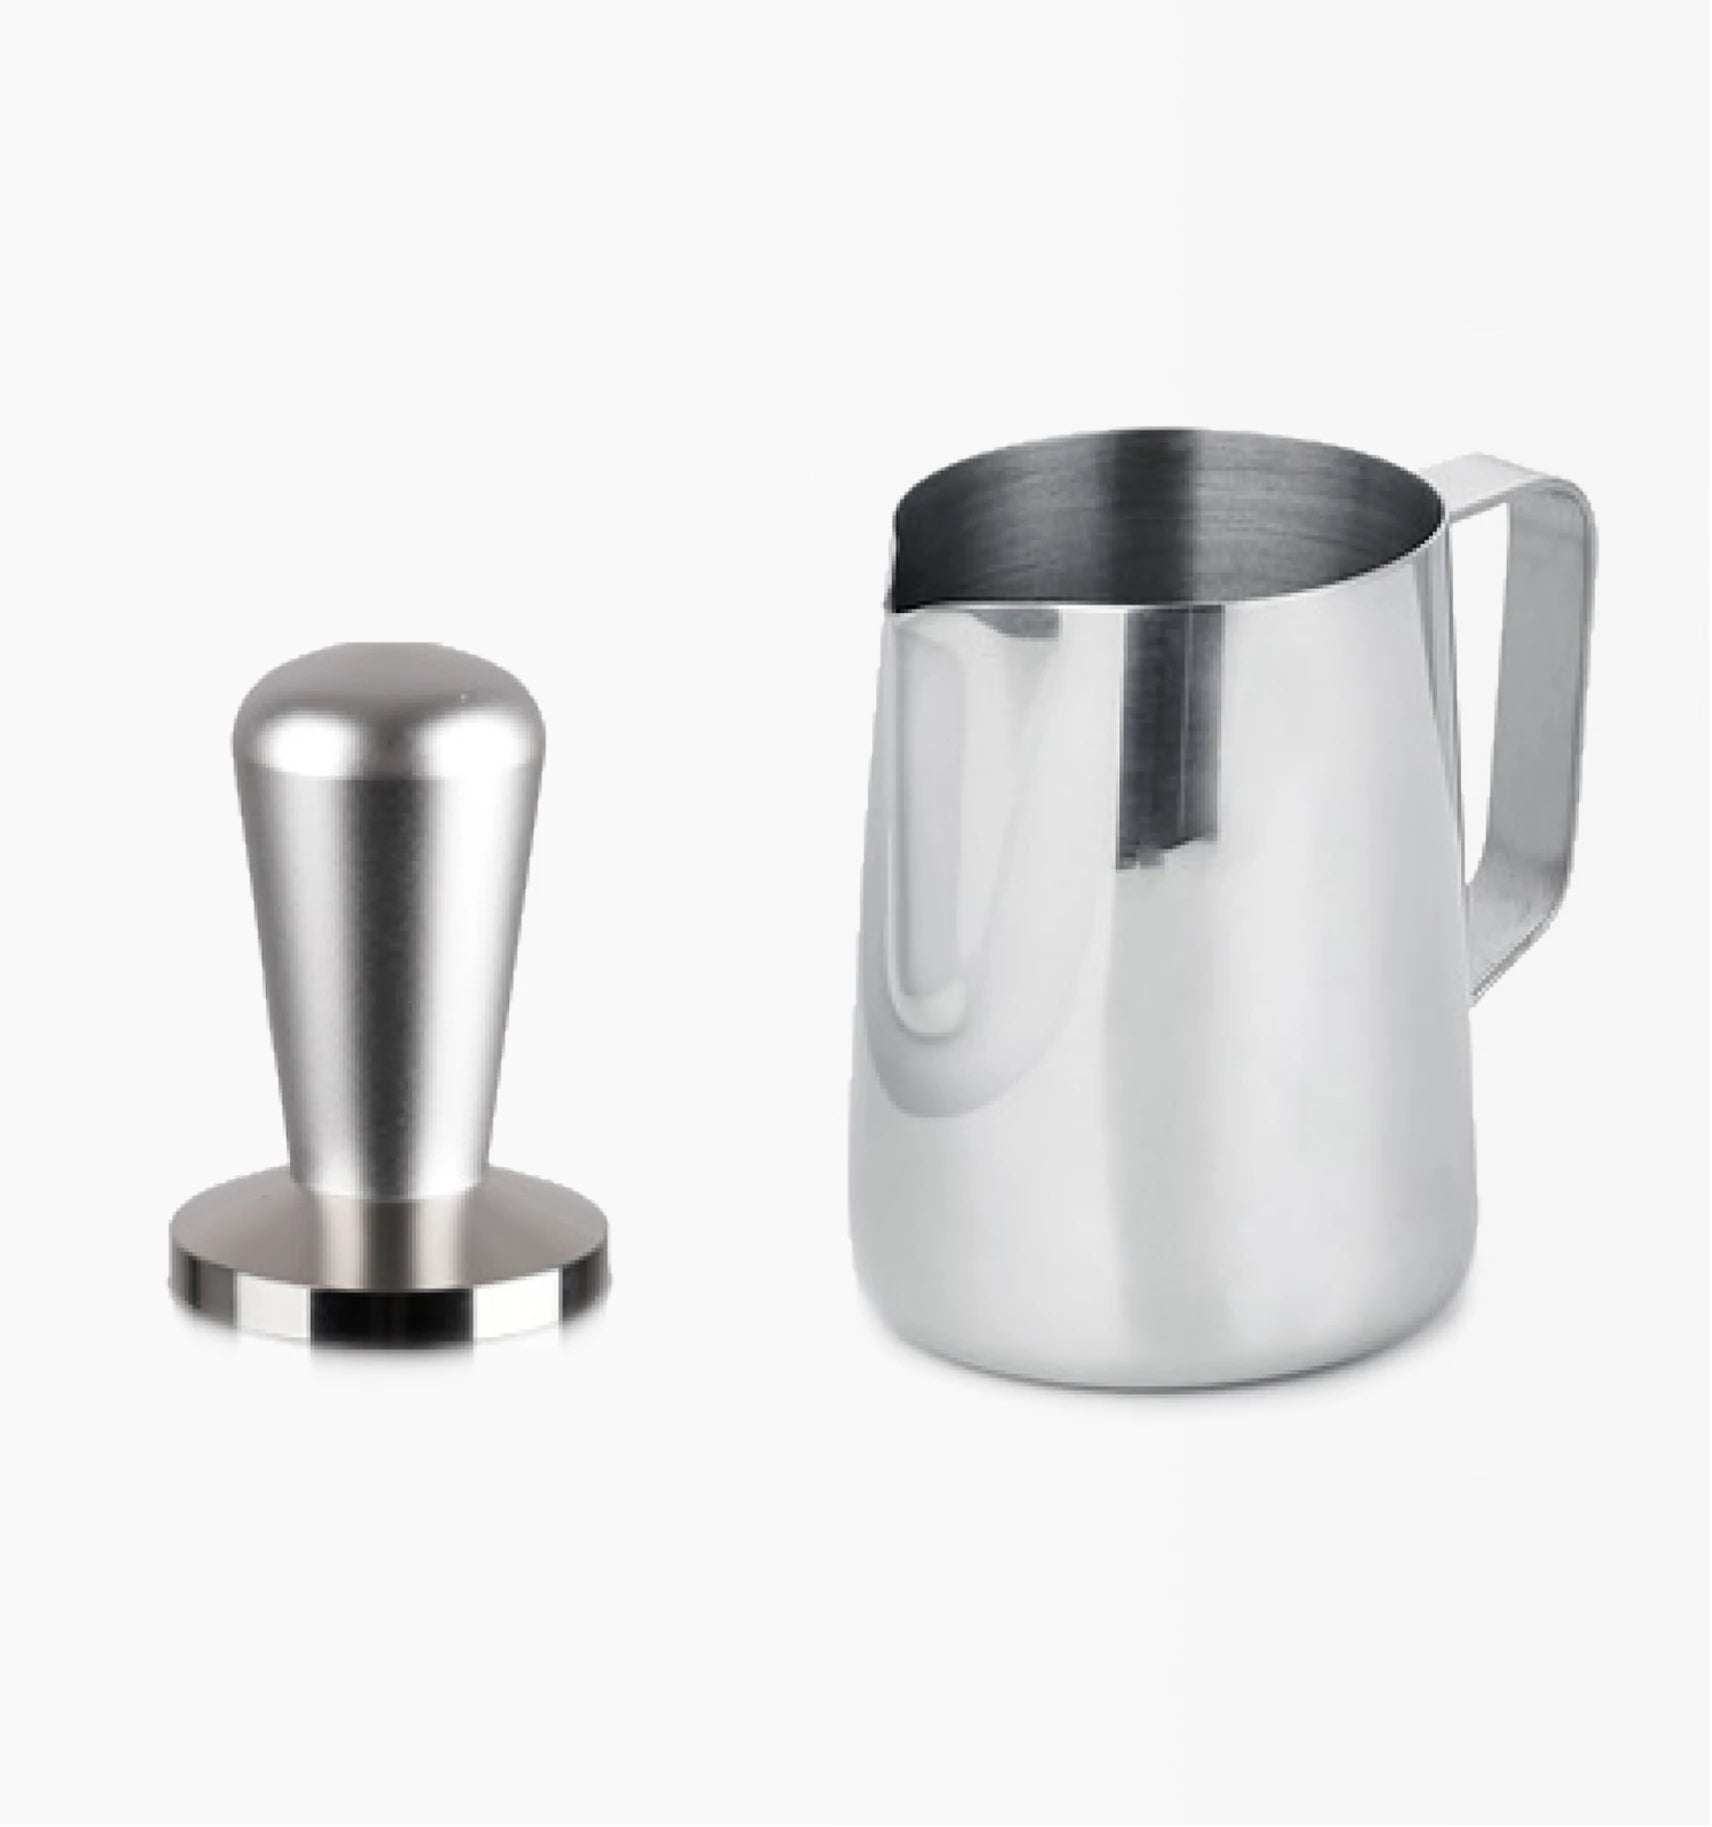 Barista tools featuring a metal coffee tamper and stainless steel frothing pitcher.